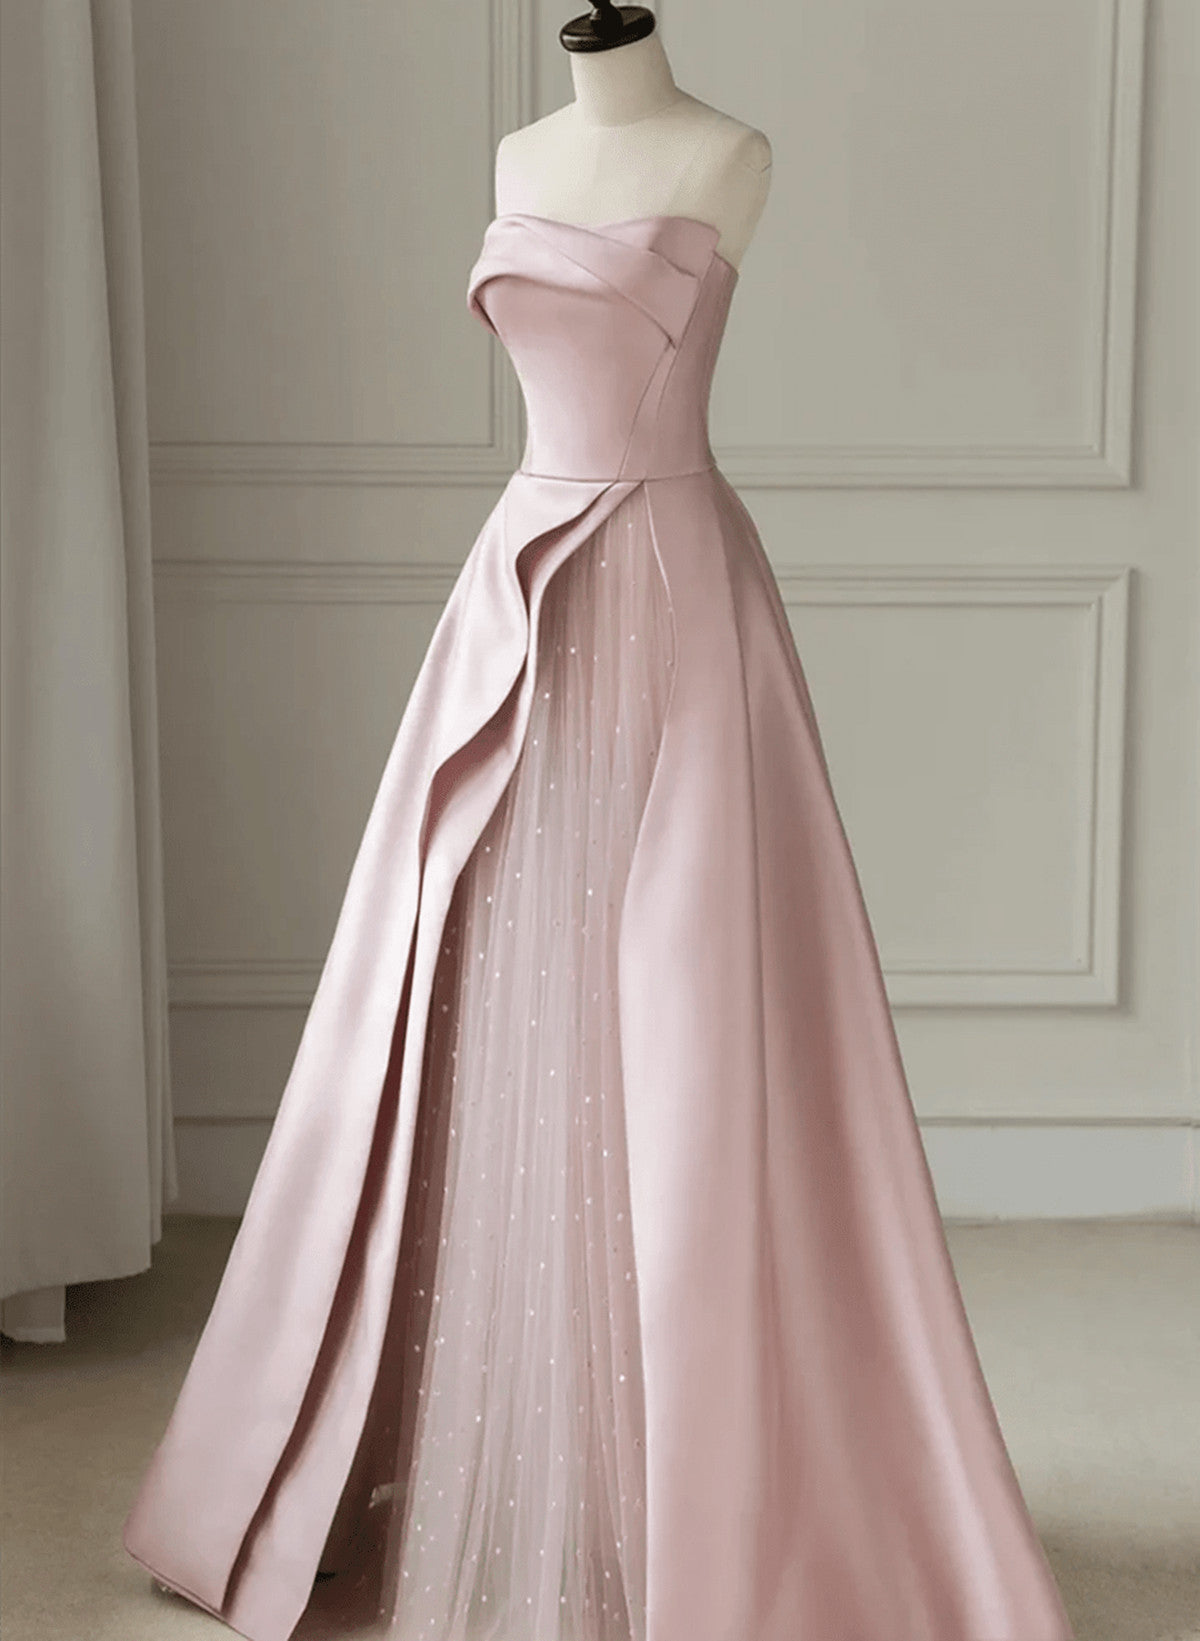 Pink Satin and Tulle Long Party Dress, A-line Pink Prom Dress